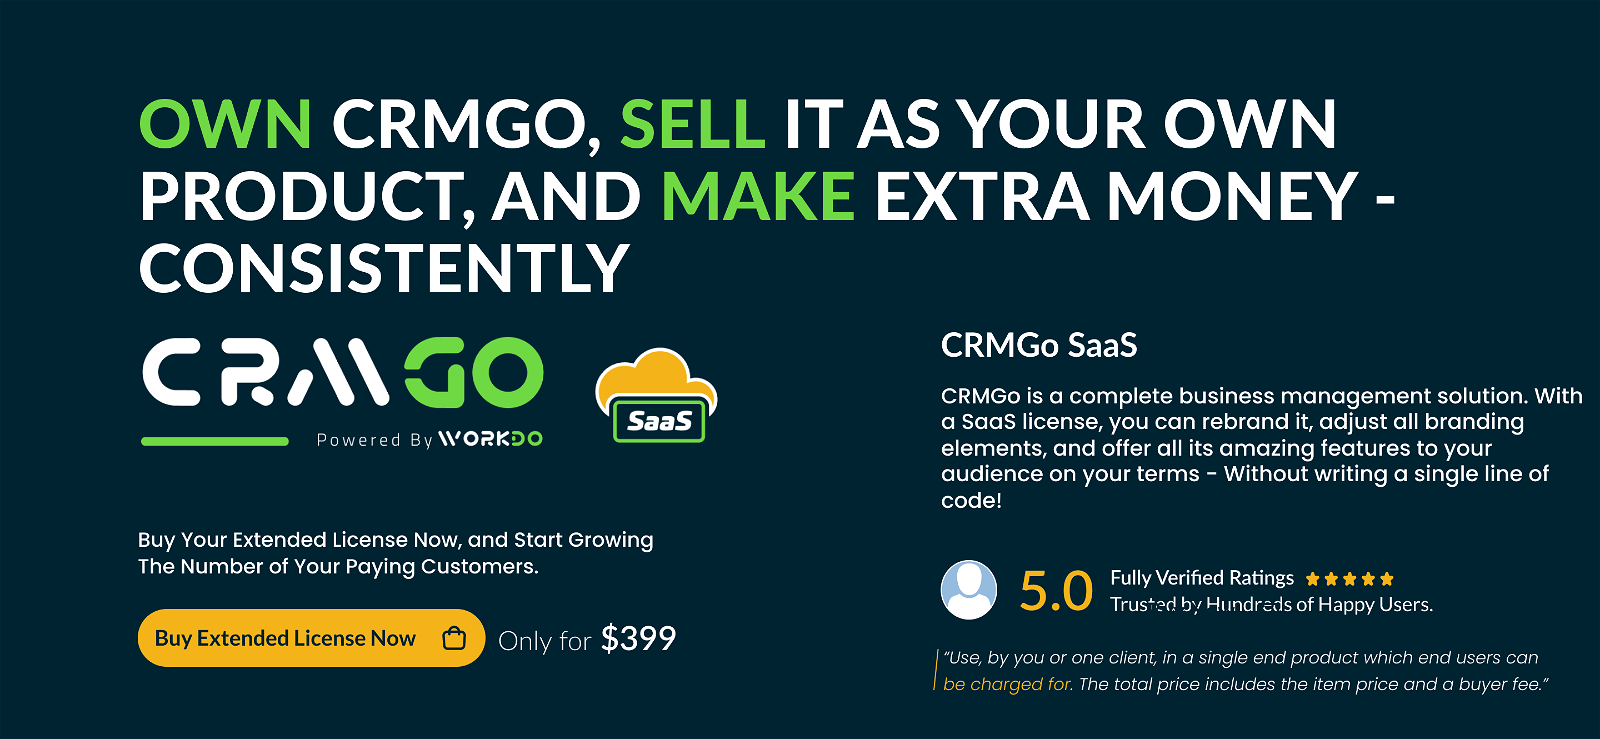 CRMGo SaaS - Projects, Accounting, Leads, Deals & HRM Tool - 6